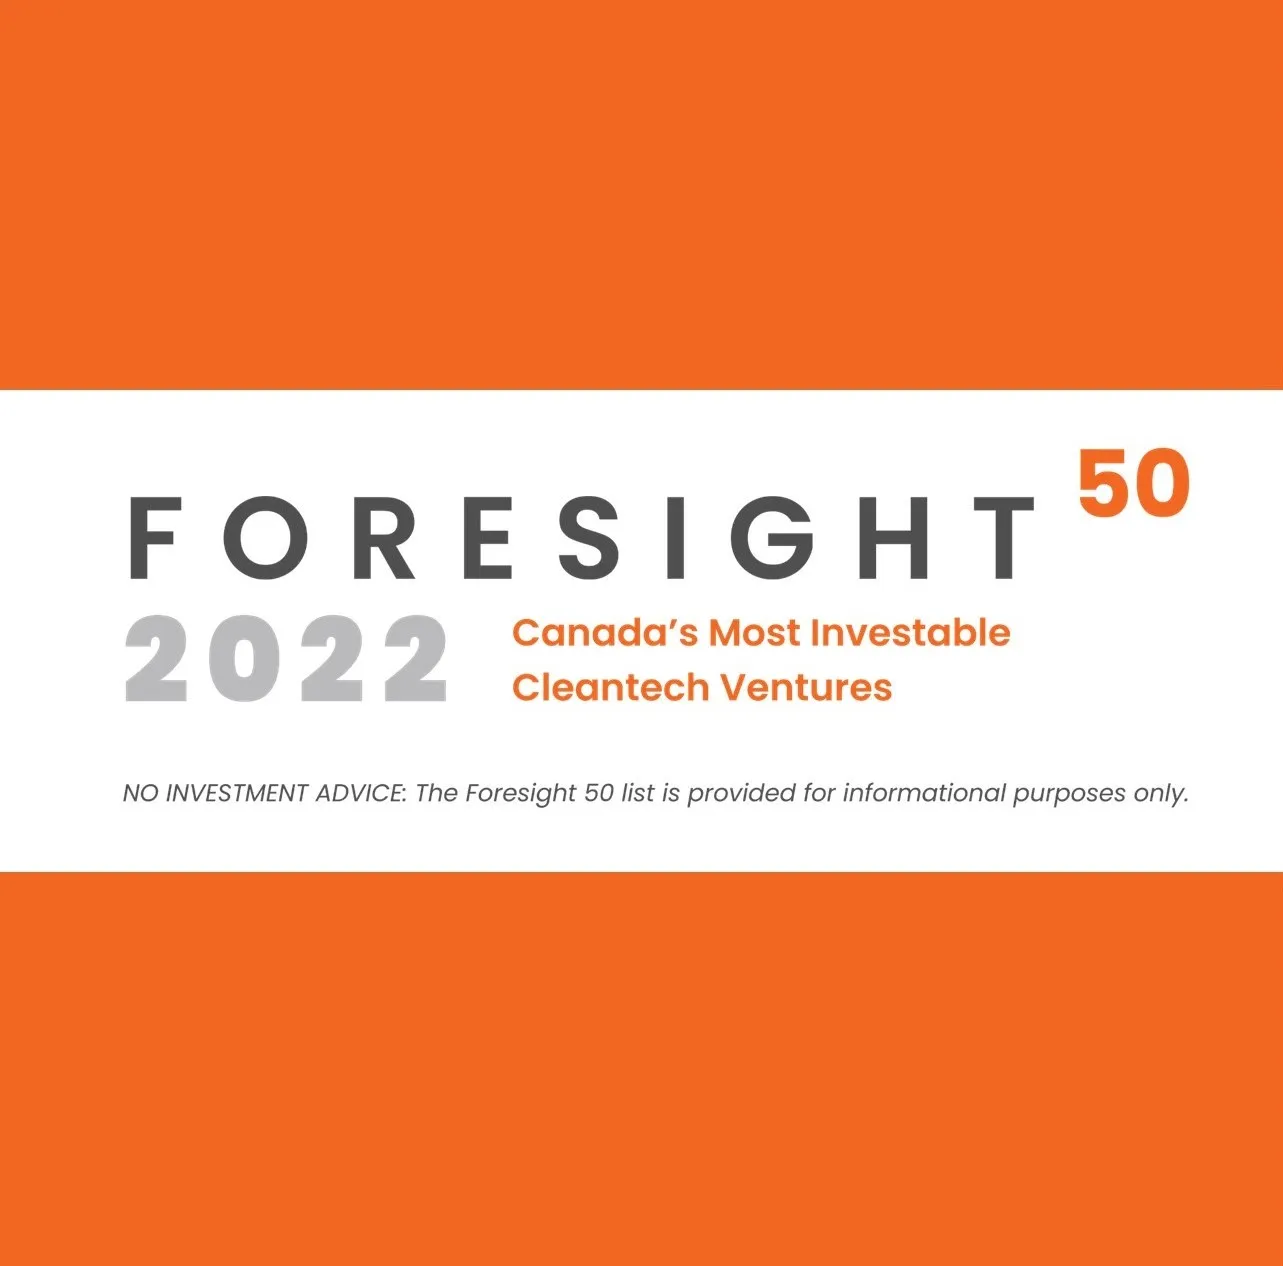 LWR RECOGNIZED AS ONE OF THE COUNTRY’S MOST INVESTABLE CLEANTECH VENTURES BY FORESIGHT CANADA